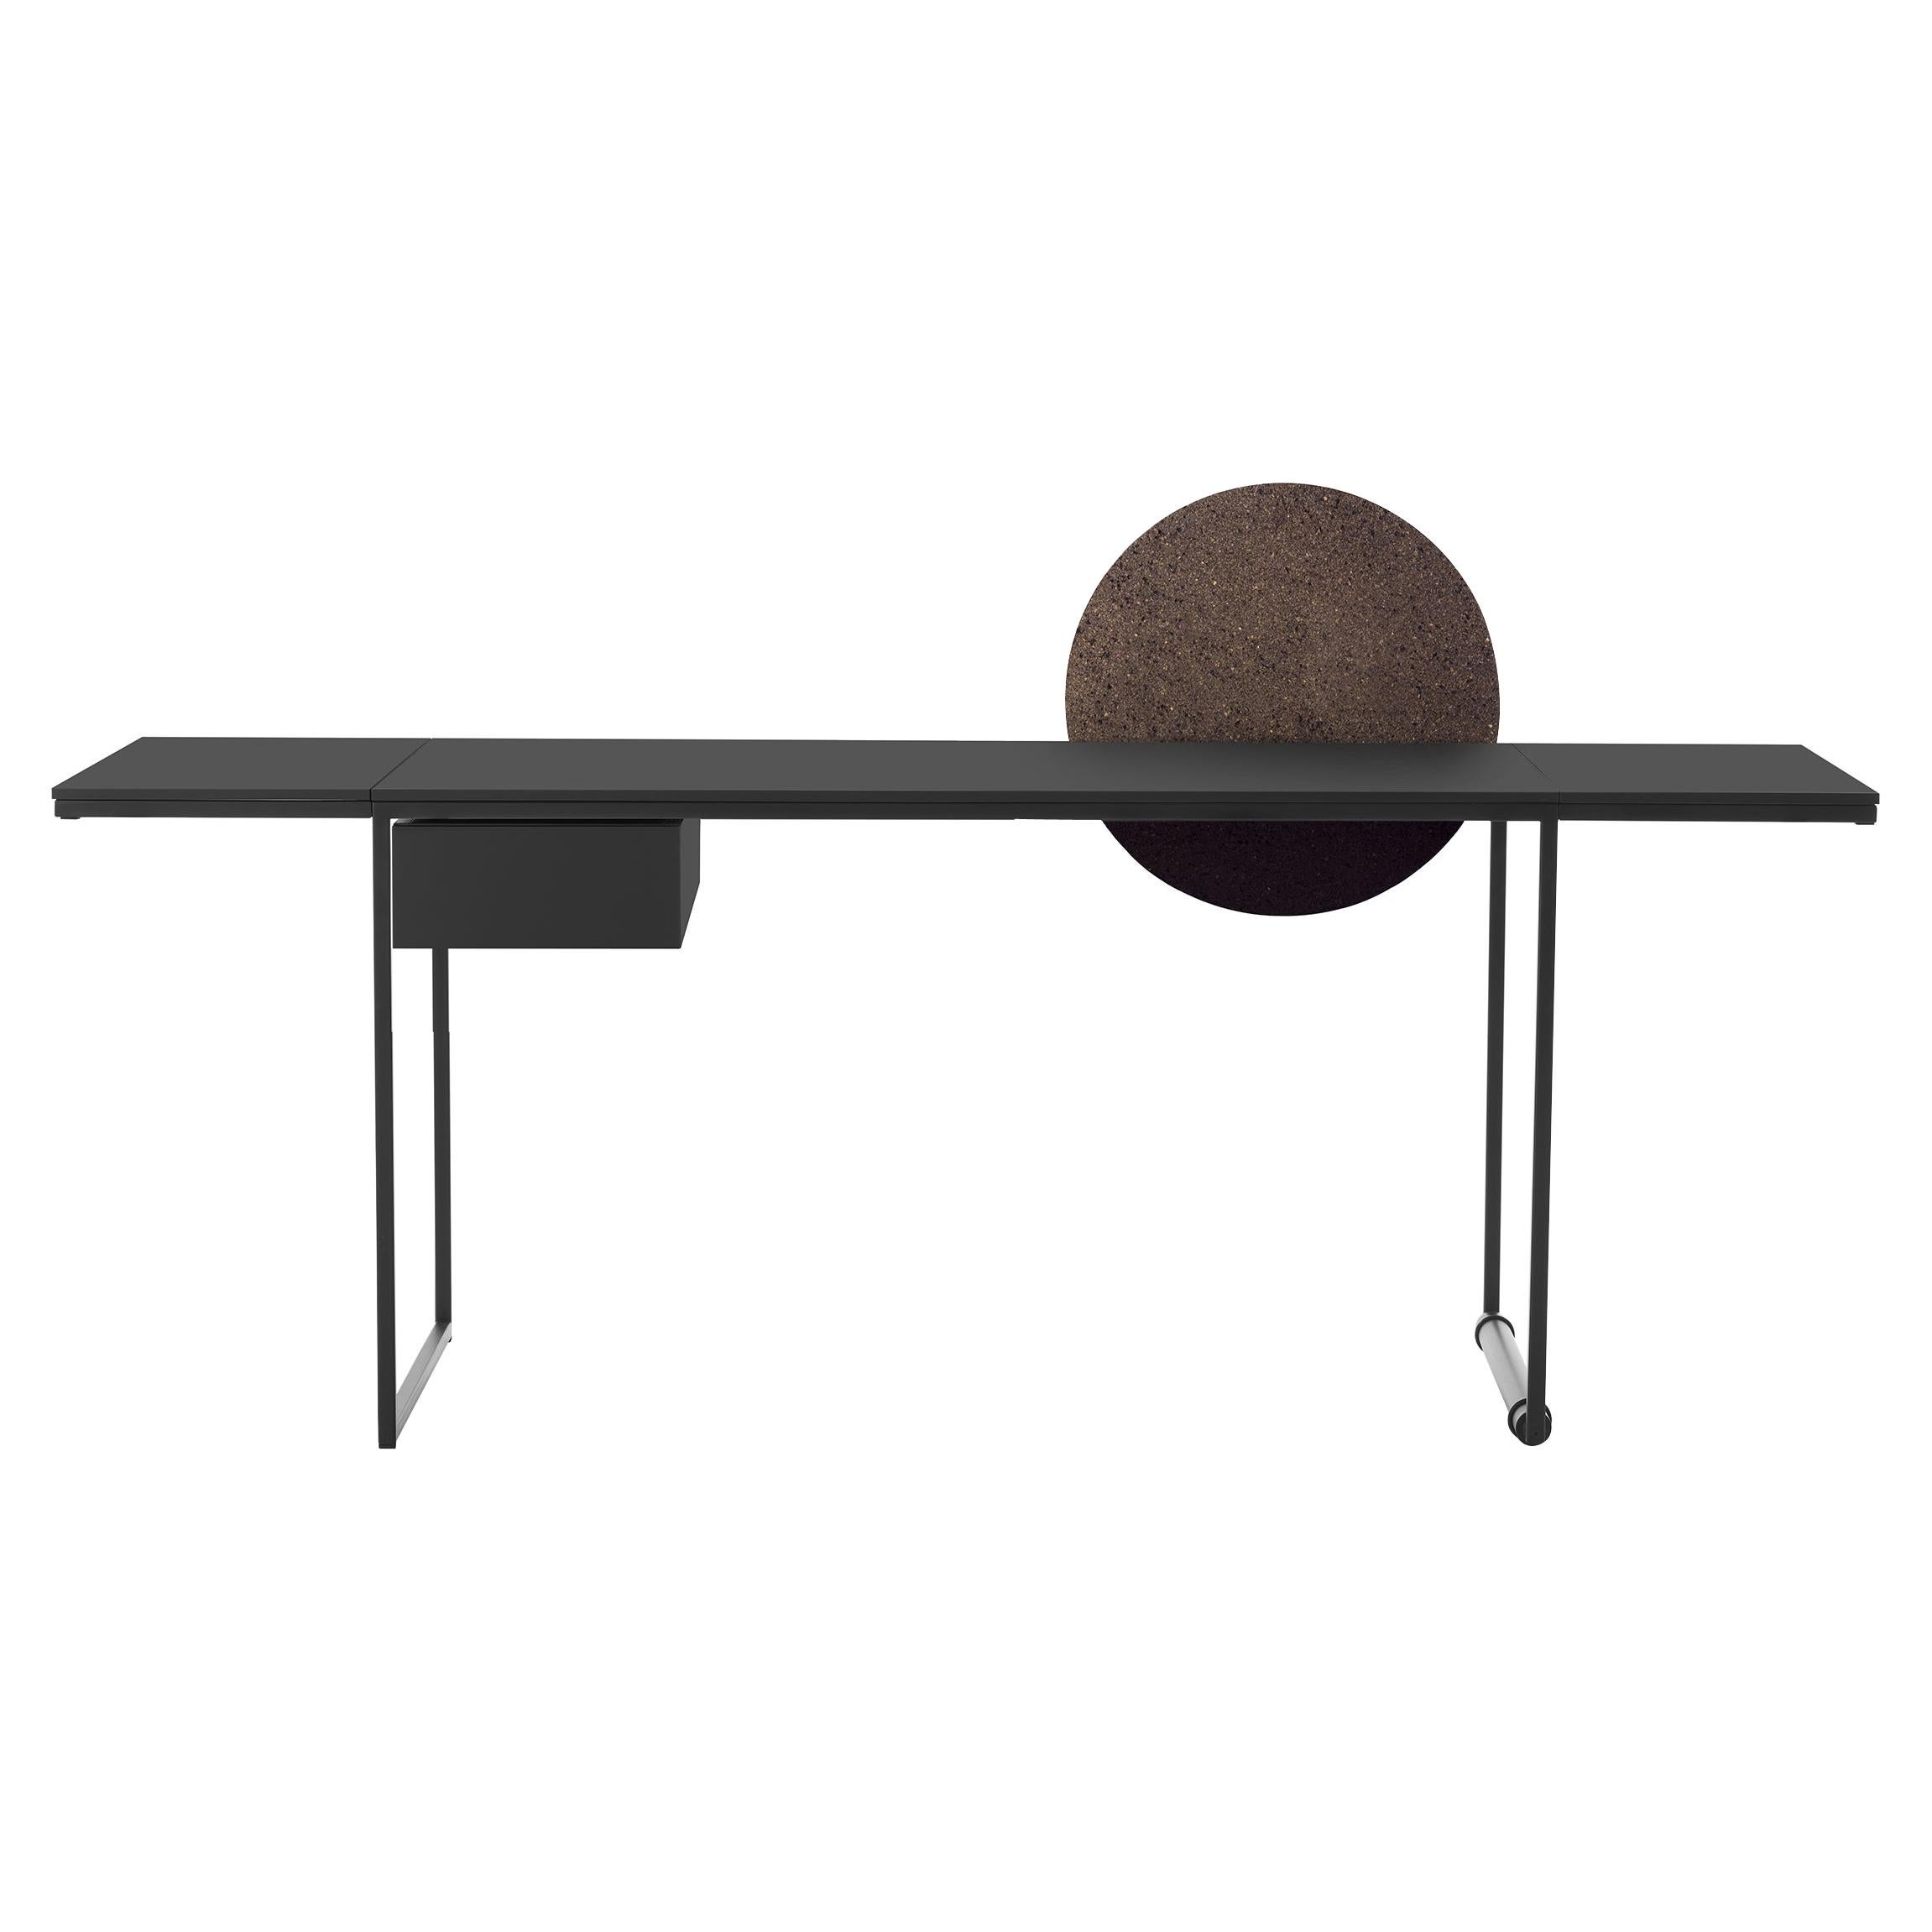 XXX Extendible Coffee Table in Matte Black with Cork Panel and Drawer by Lapo For Sale